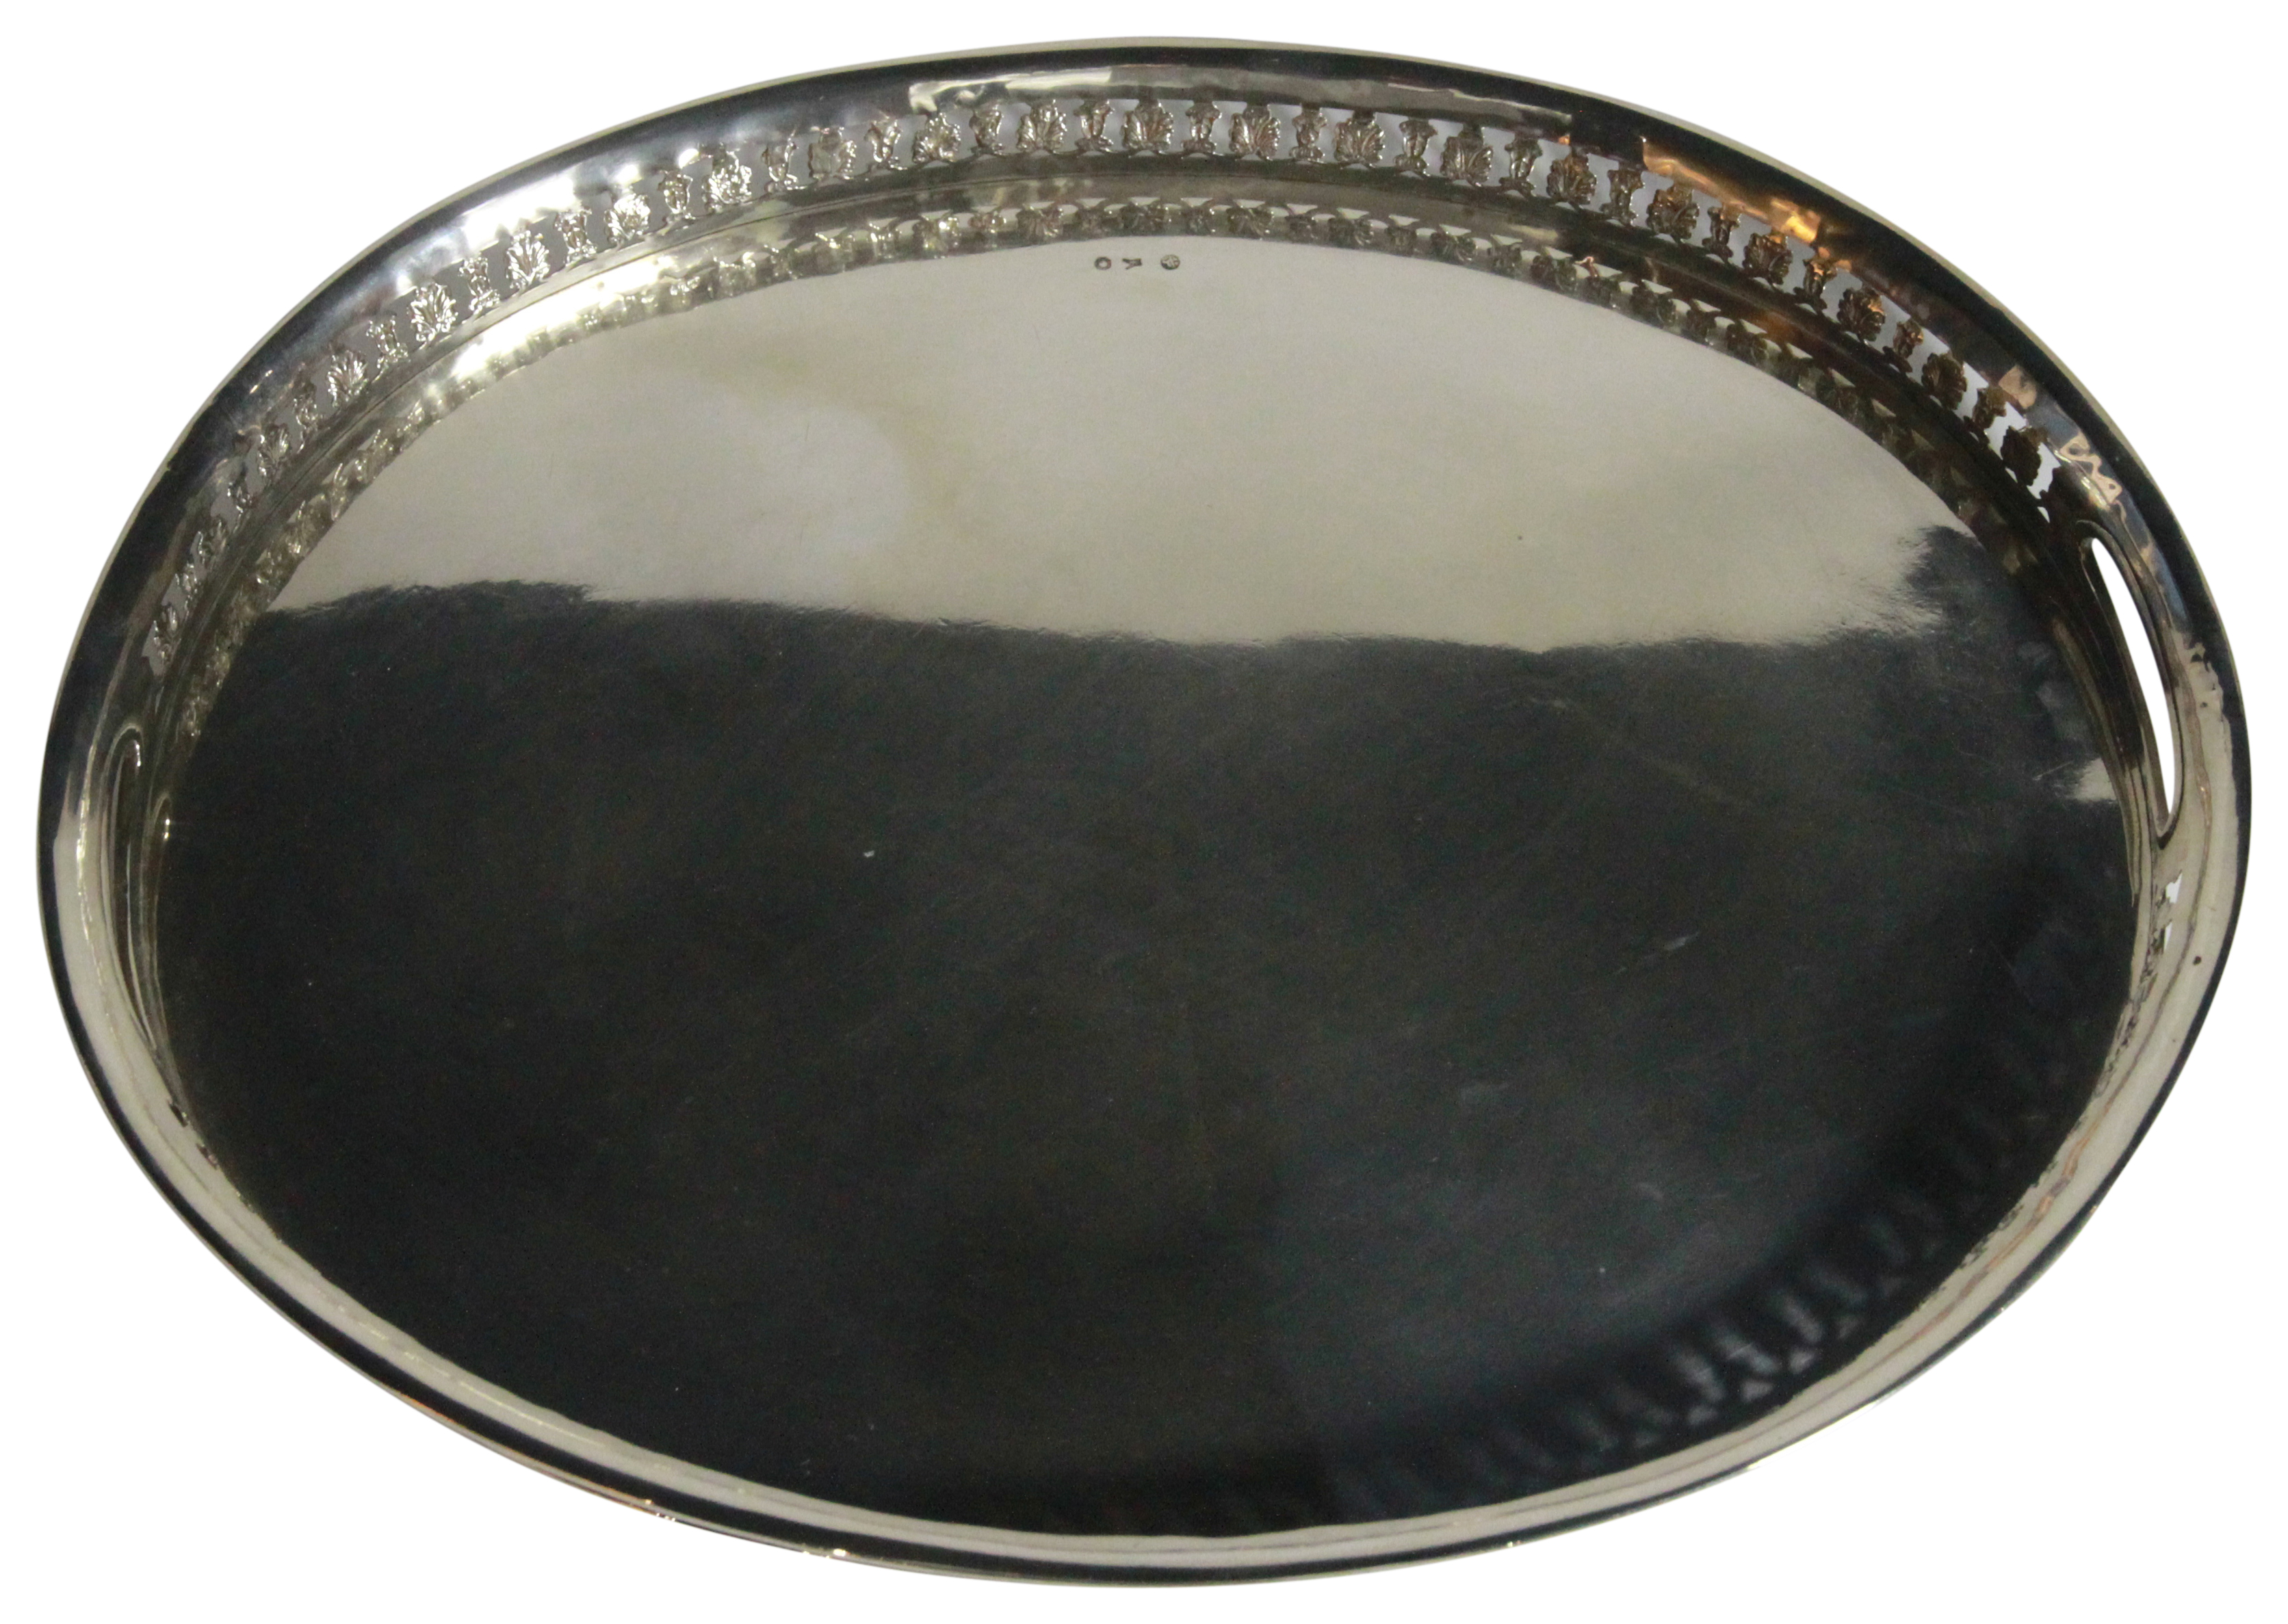 A large Russian silver oval tray. With pierced side decorations. Circa 1840 - (1005 grams) (